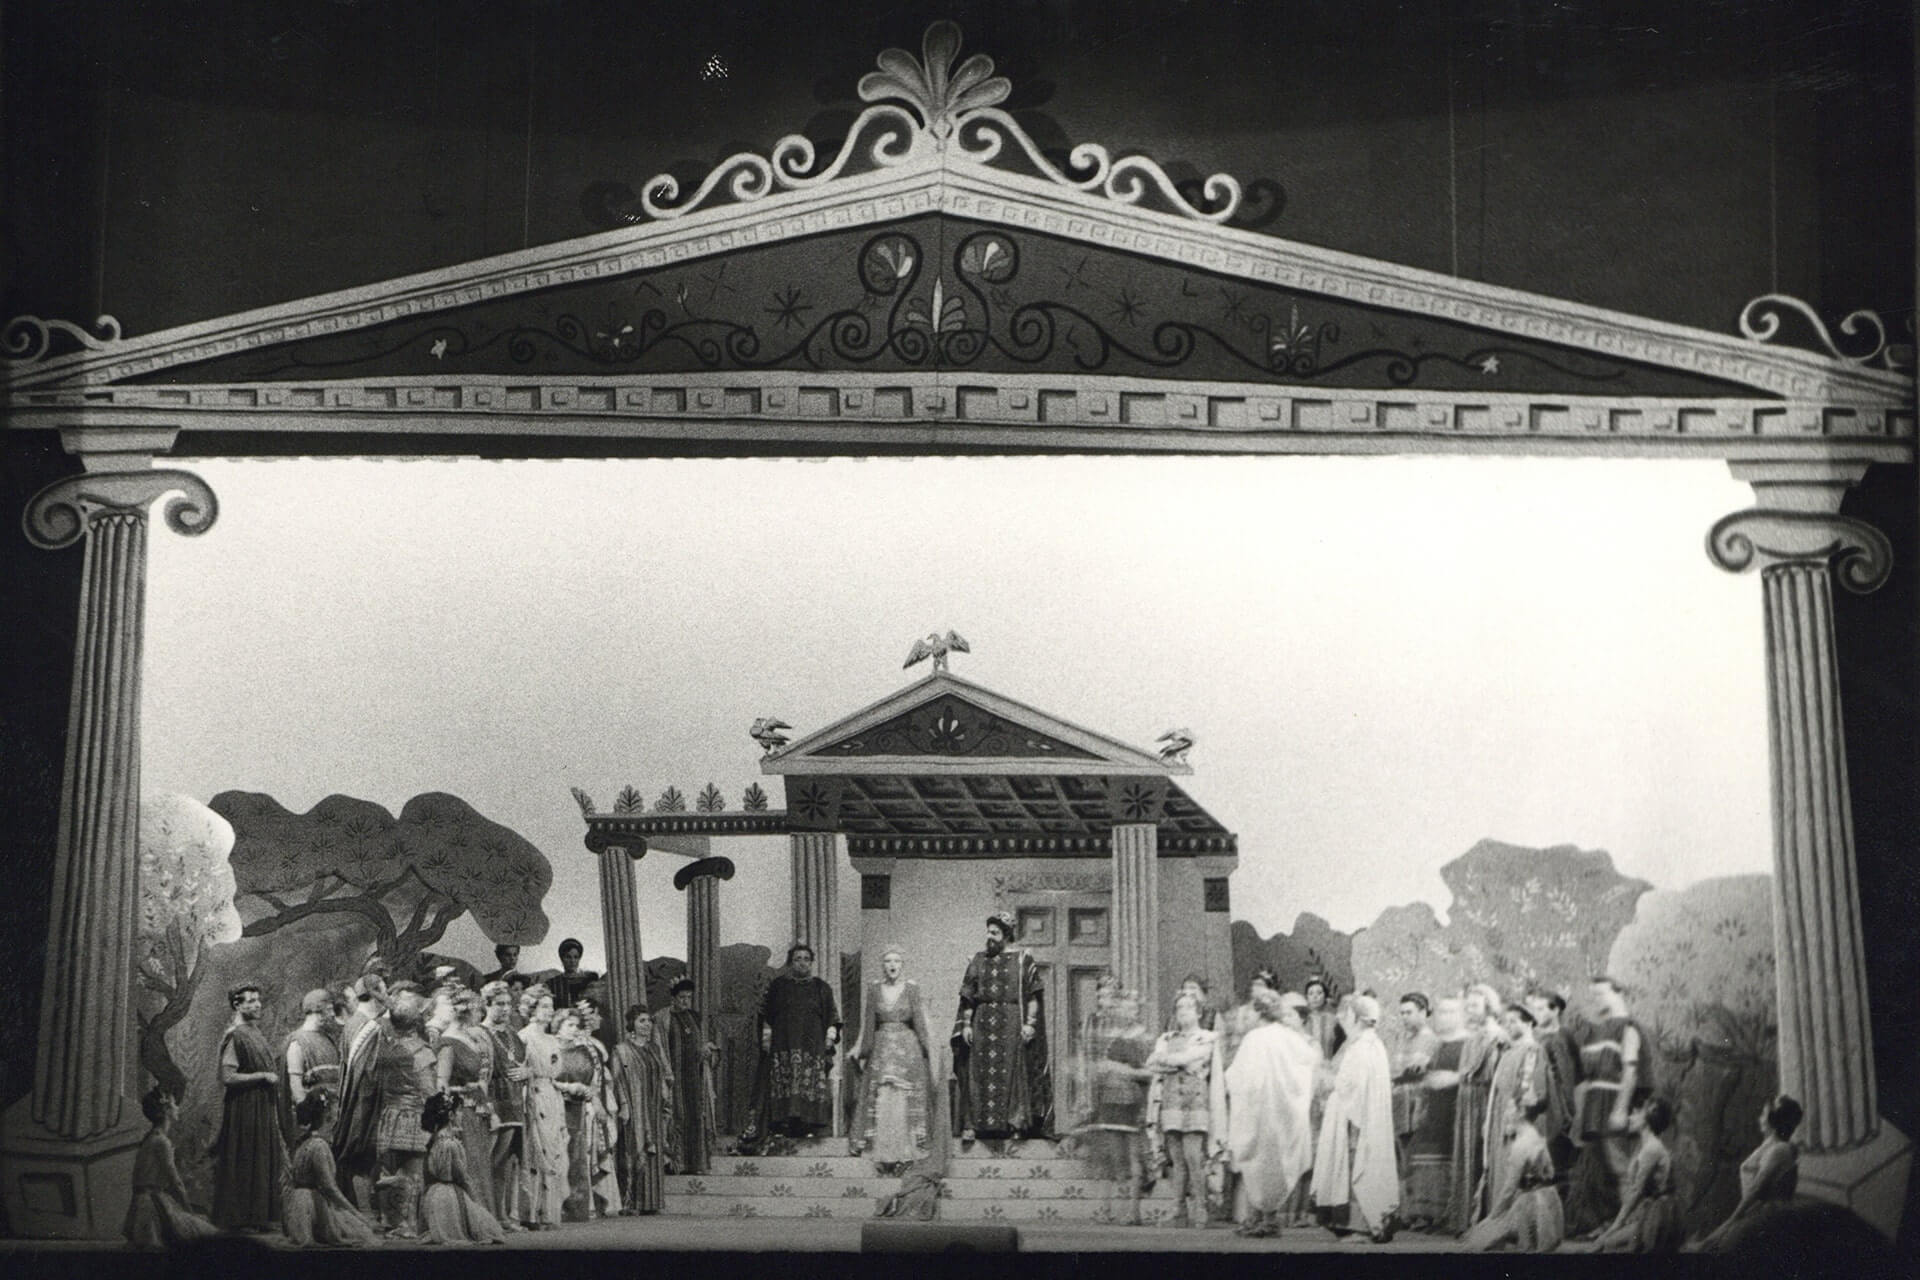 Archive material from the Greek National Opera production of La belle Hélène by Jacques Offenbach. Conductor: Walter Pfeffer, stage direction: Frixos Theologides, set and costume design: Lisa Zaimi, Olympia Theatre, 1960/61